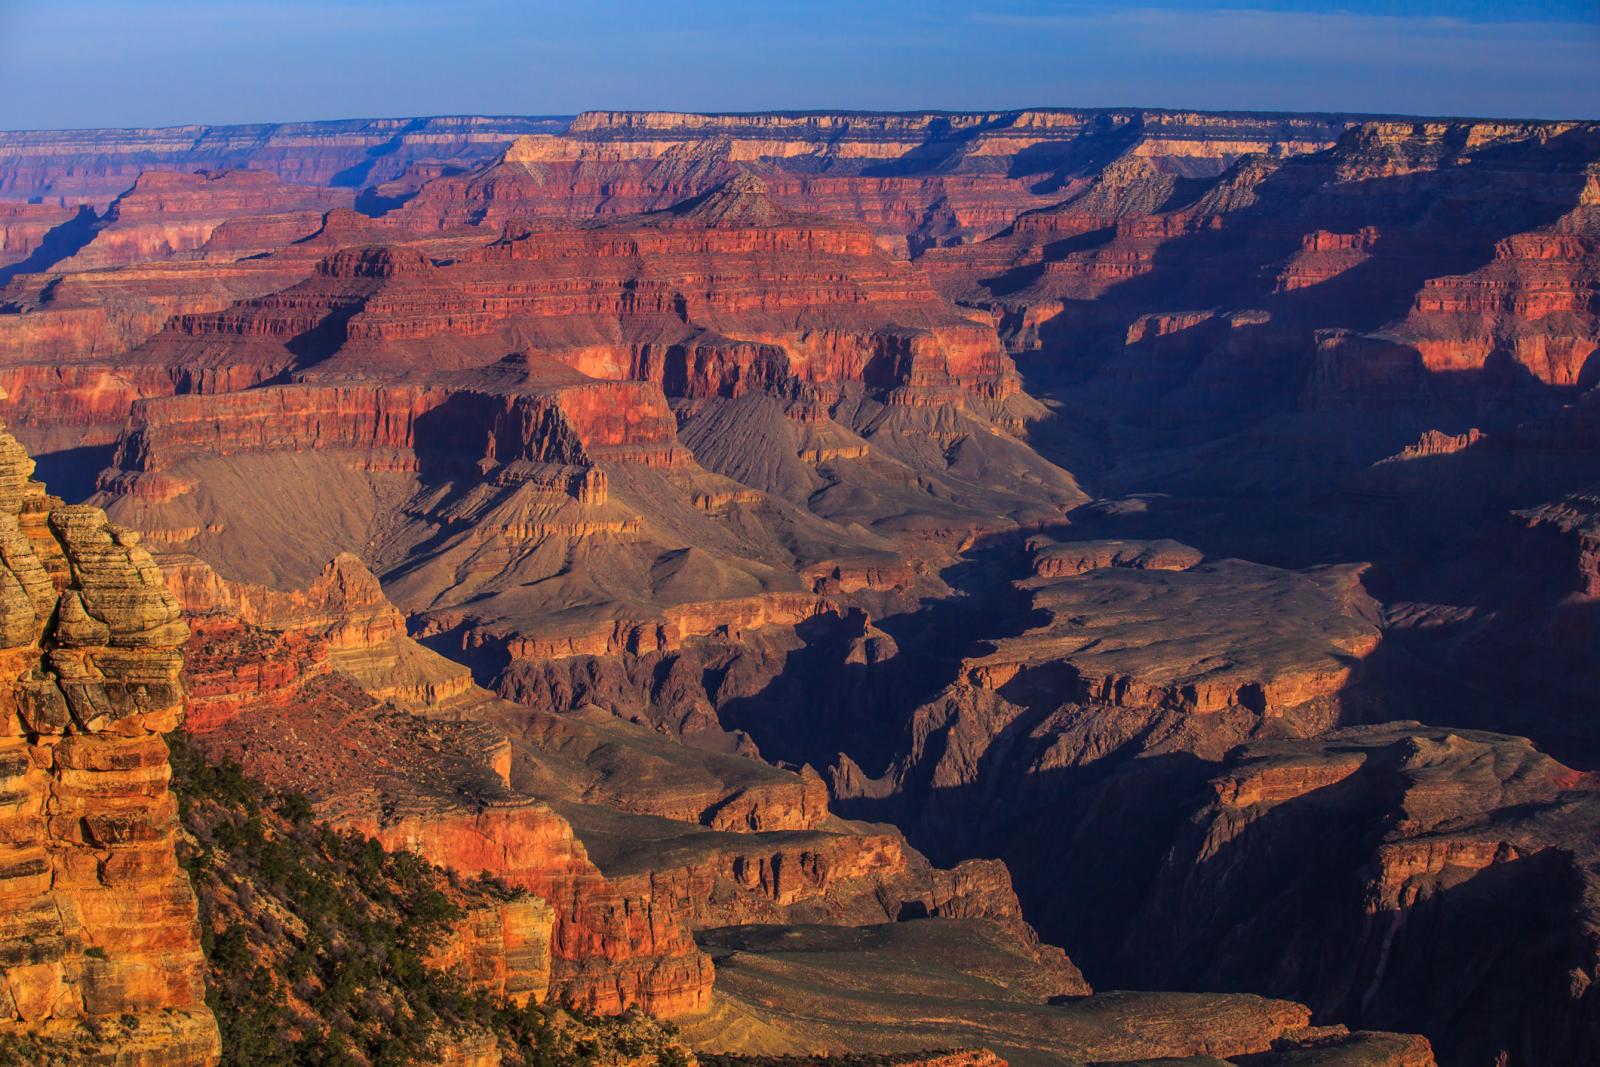 Do You Have the Smarts to Pass This US States Quiz? Dawn On The S Rim Of The Grand Canyon (8645178272)